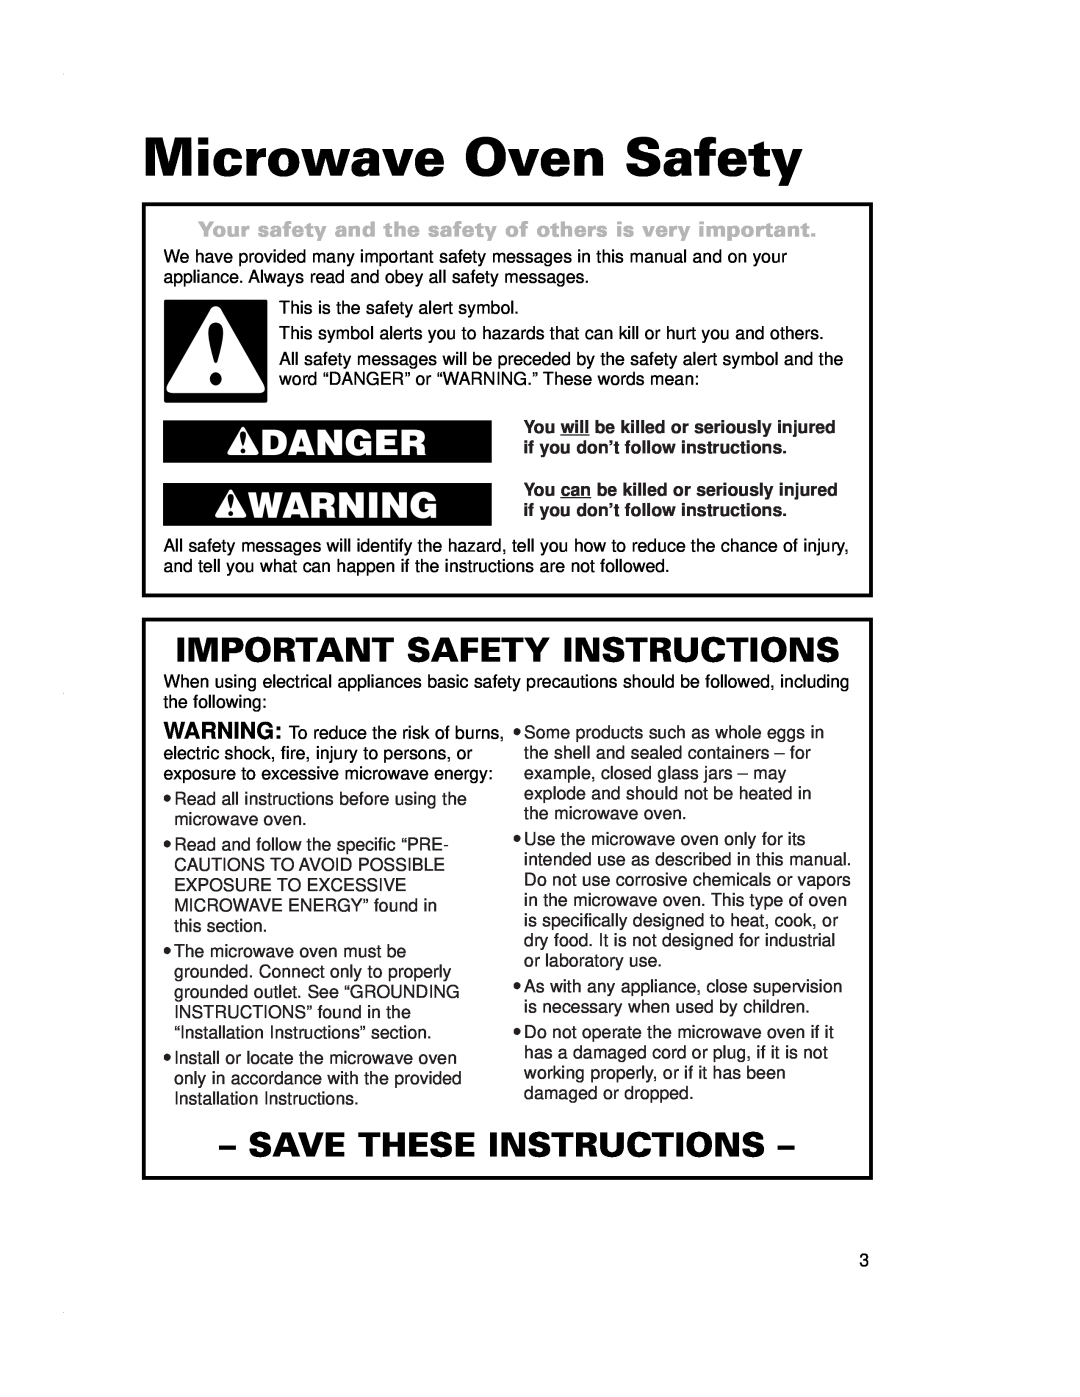 Crosley CMT135SG Microwave Oven Safety, wDANGER wWARNING, Important Safety Instructions, Save These Instructions 